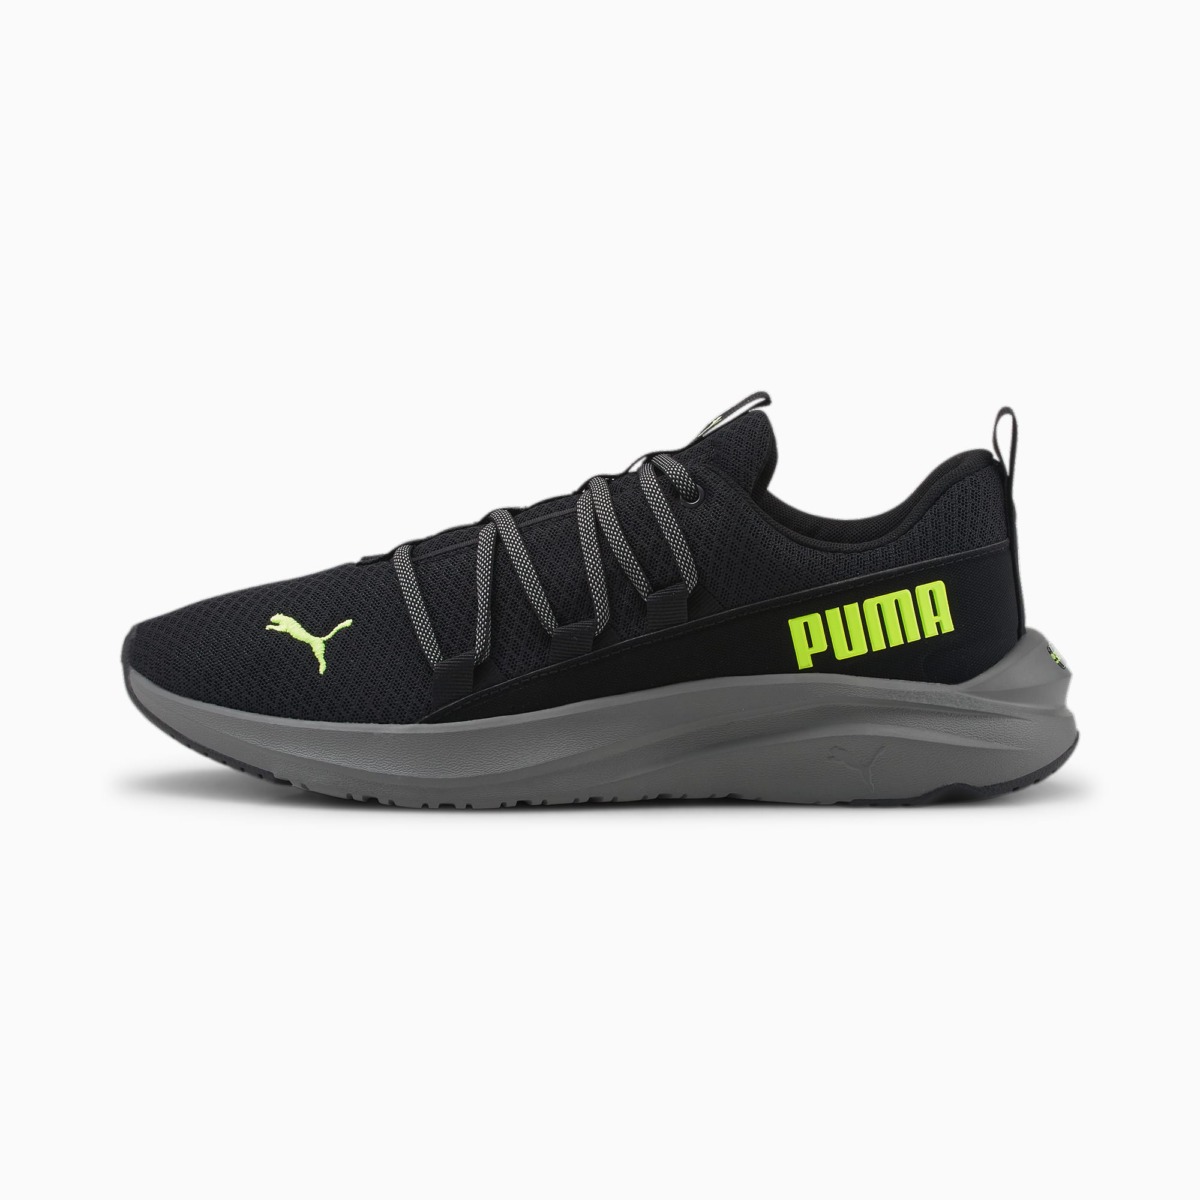 Puma Black Men's Softride Oneall Running Shoes Womens SPORTS SHOES GOOFASH